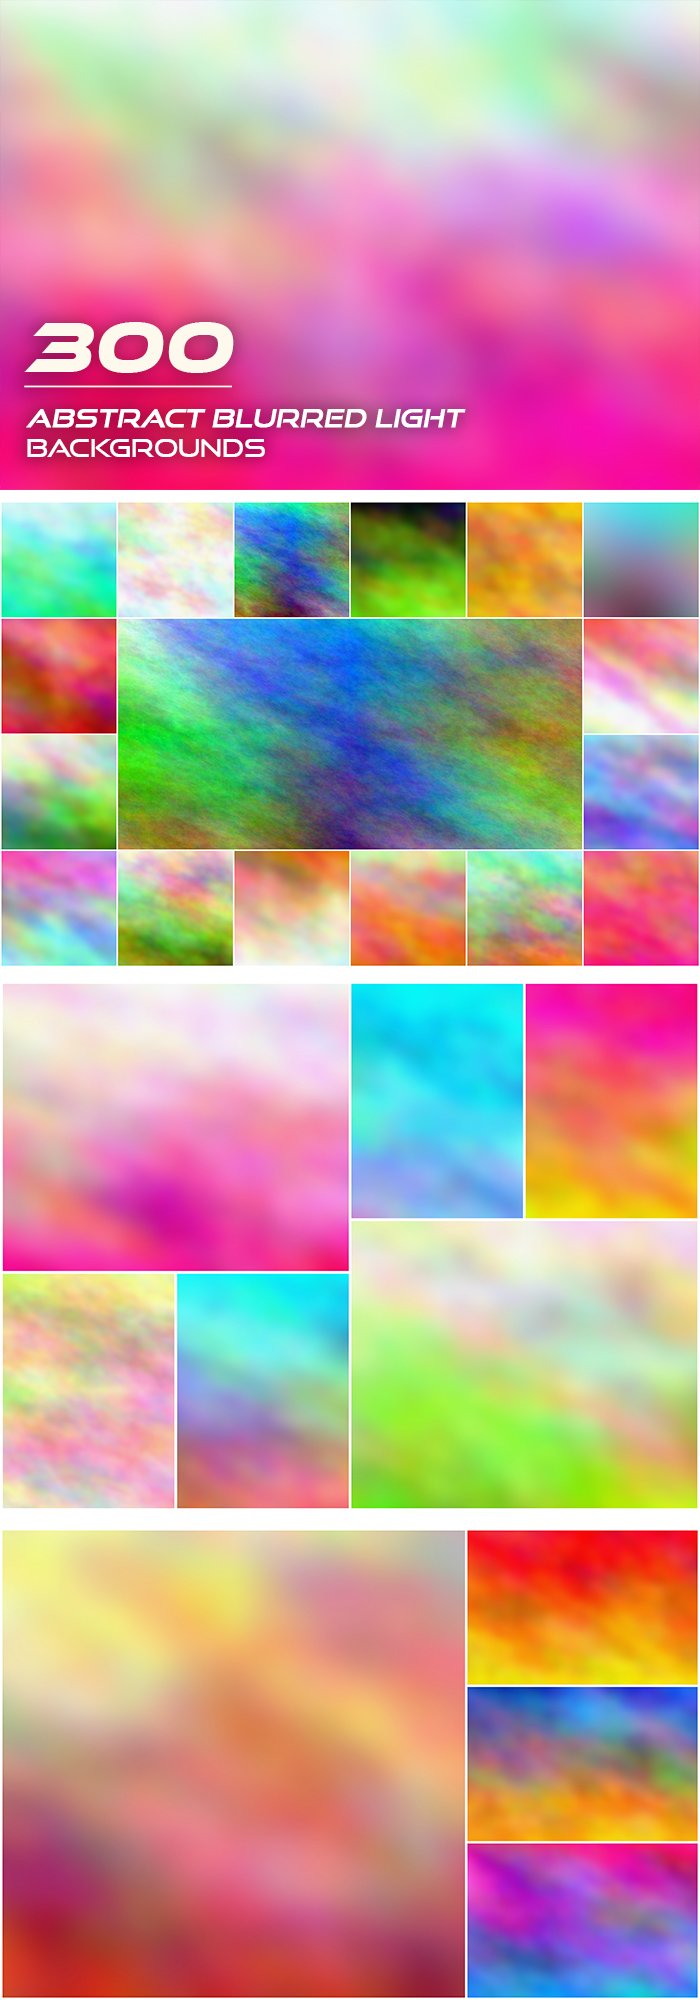 blurred light backgrounds collage